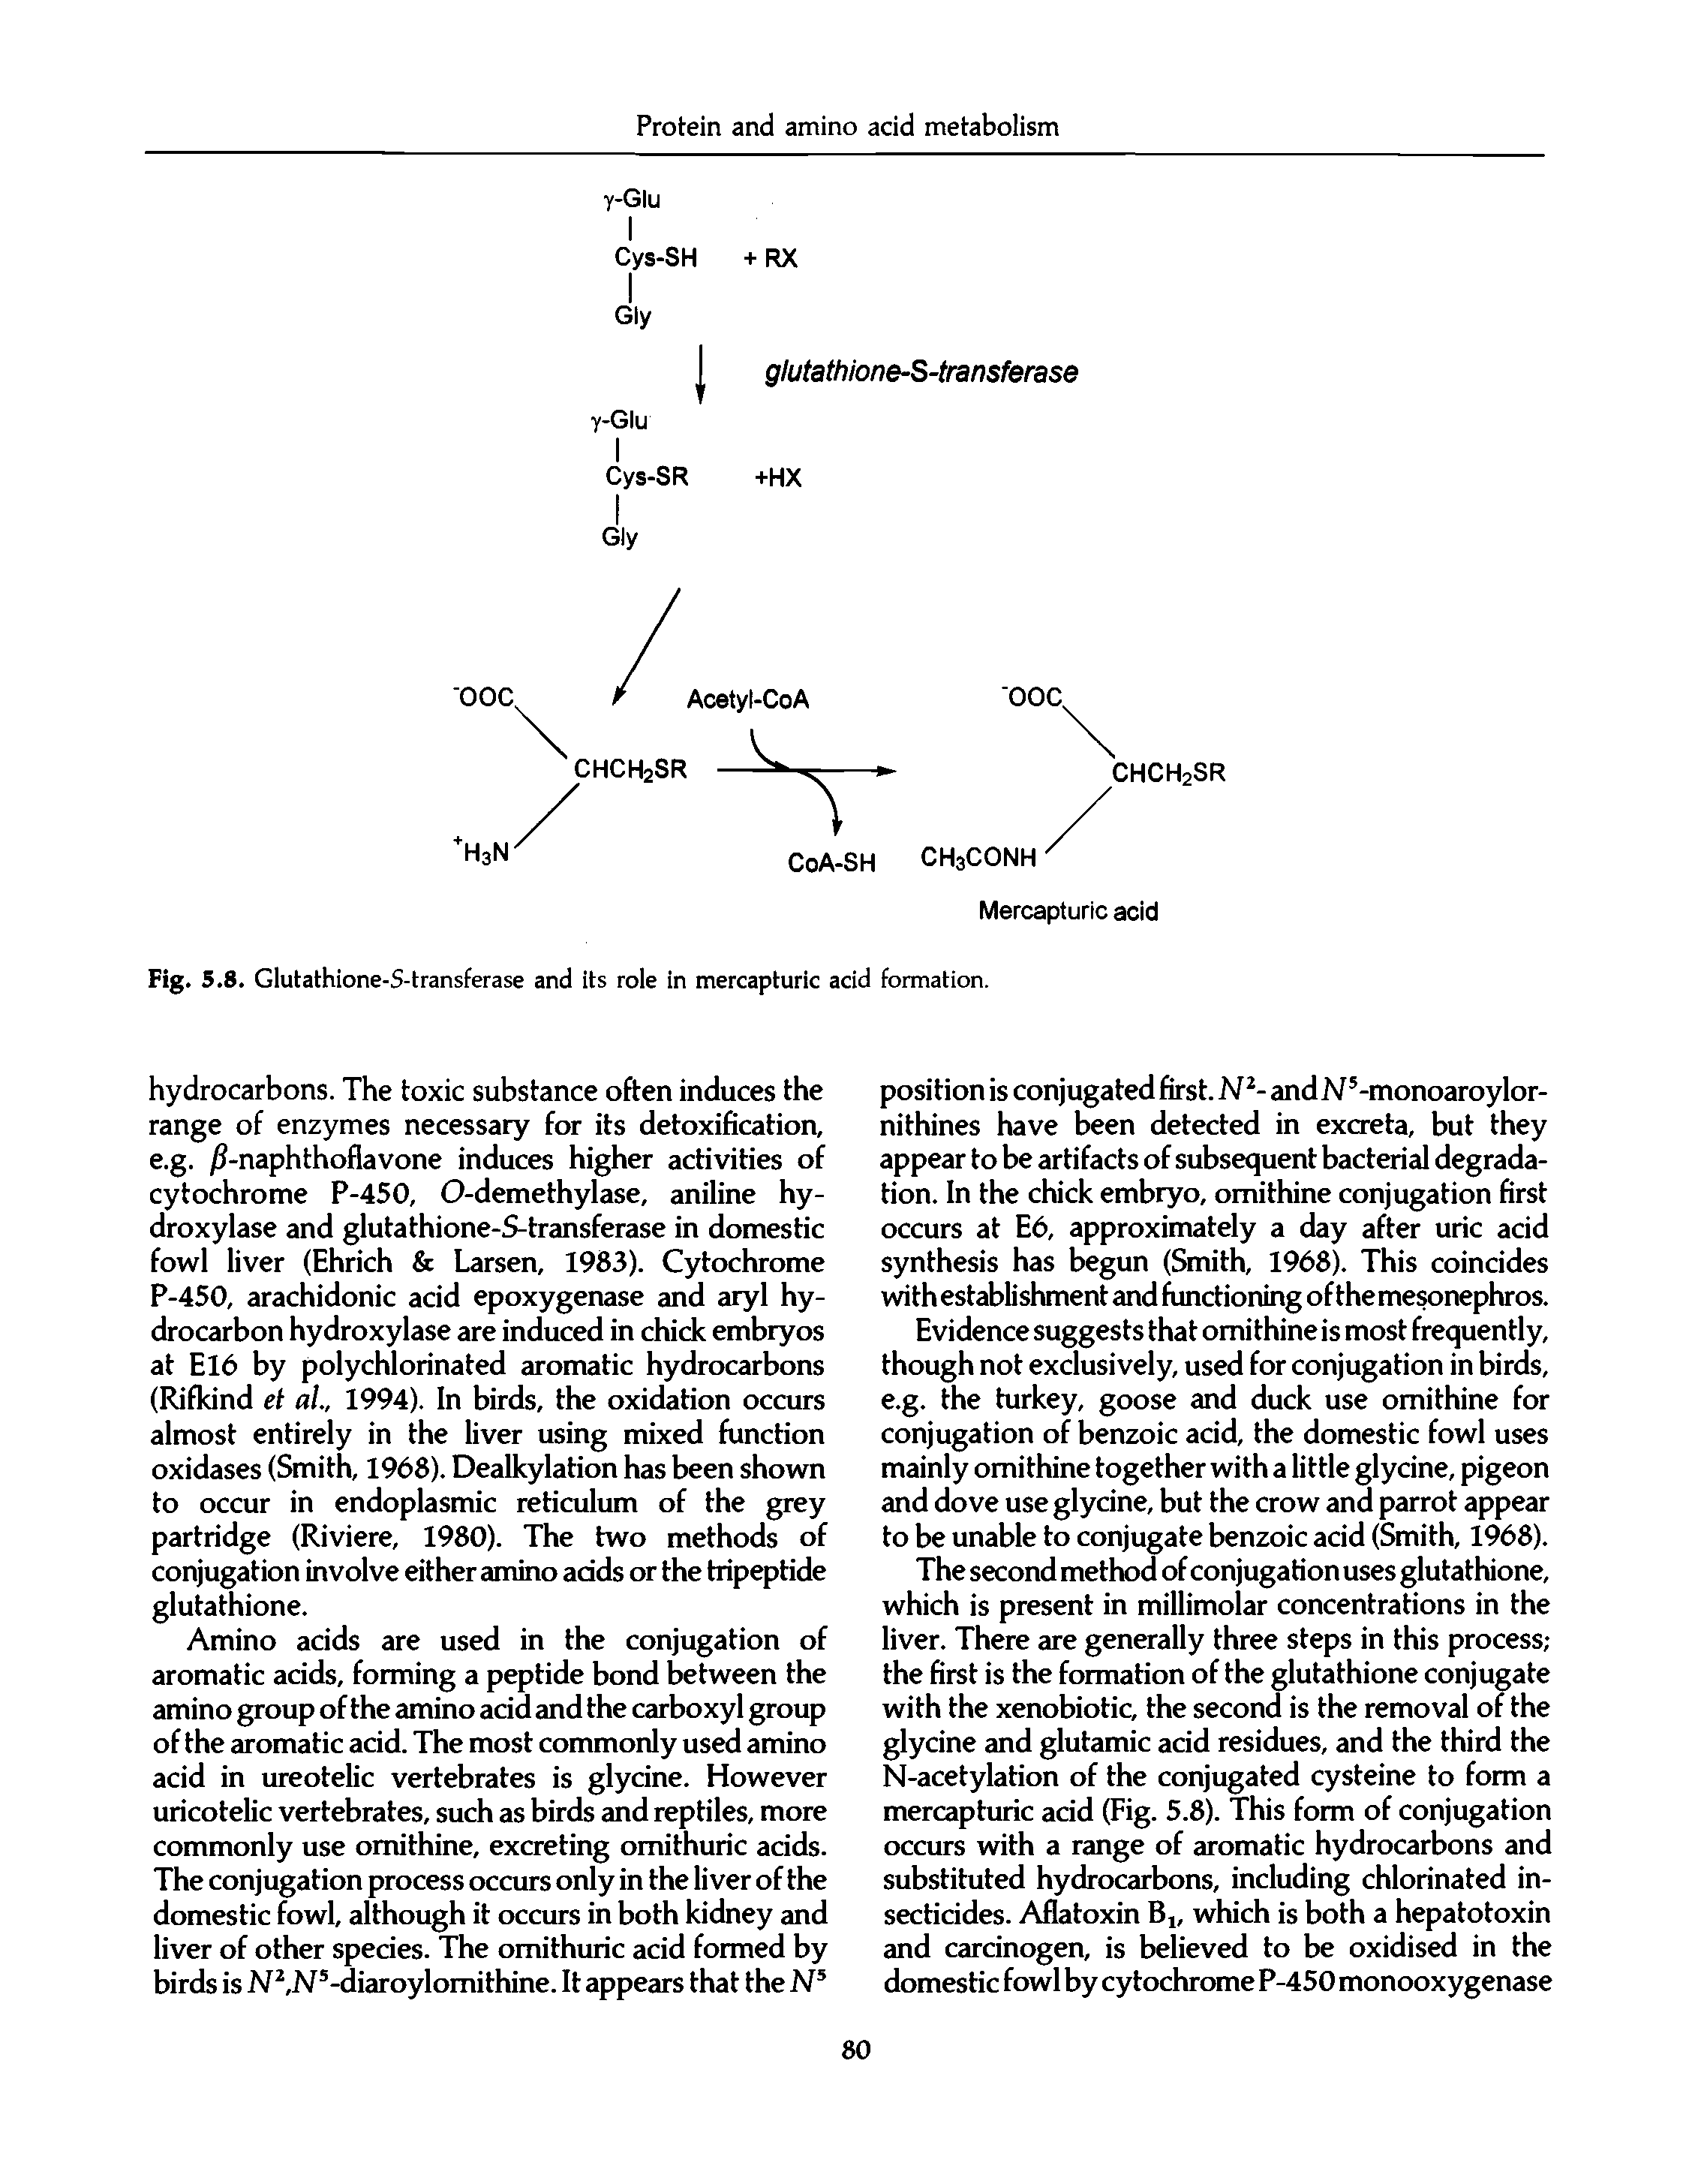 Fig. 5.8. Giutathione-S-transferase and its role in mercapturic acid formation.